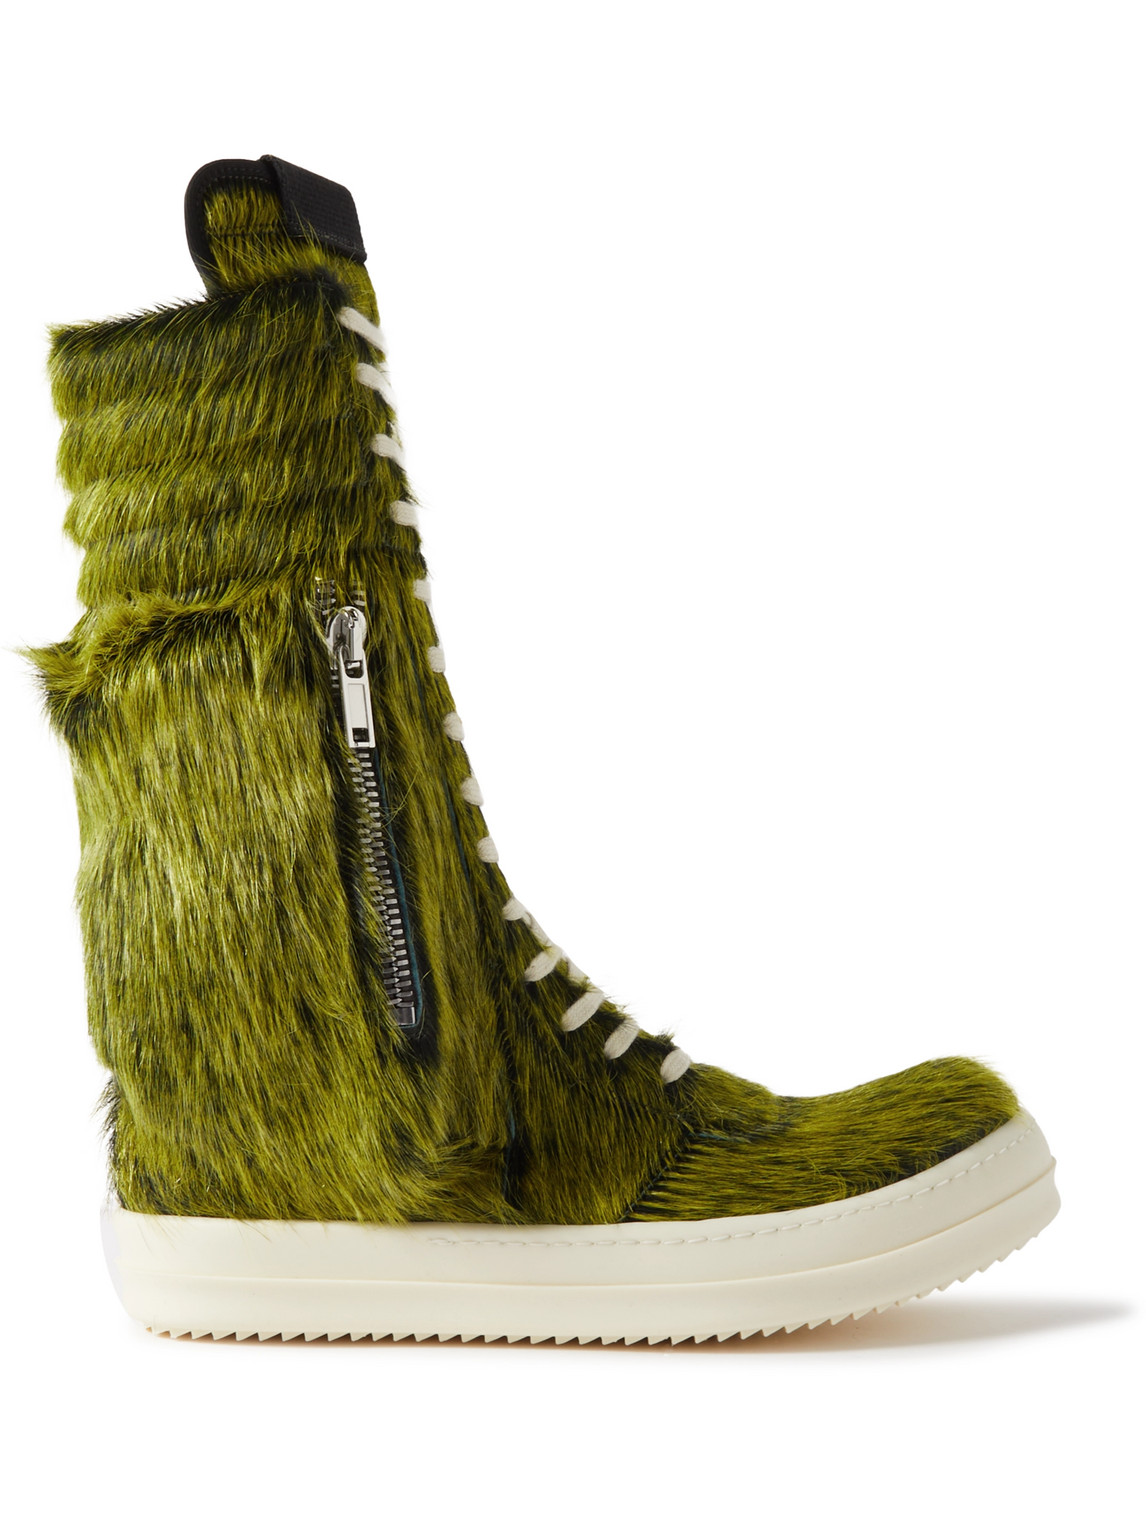 RICK OWENS GEOBASKET CALF HAIR AND LEATHER HIGH-TOP SNEAKERS